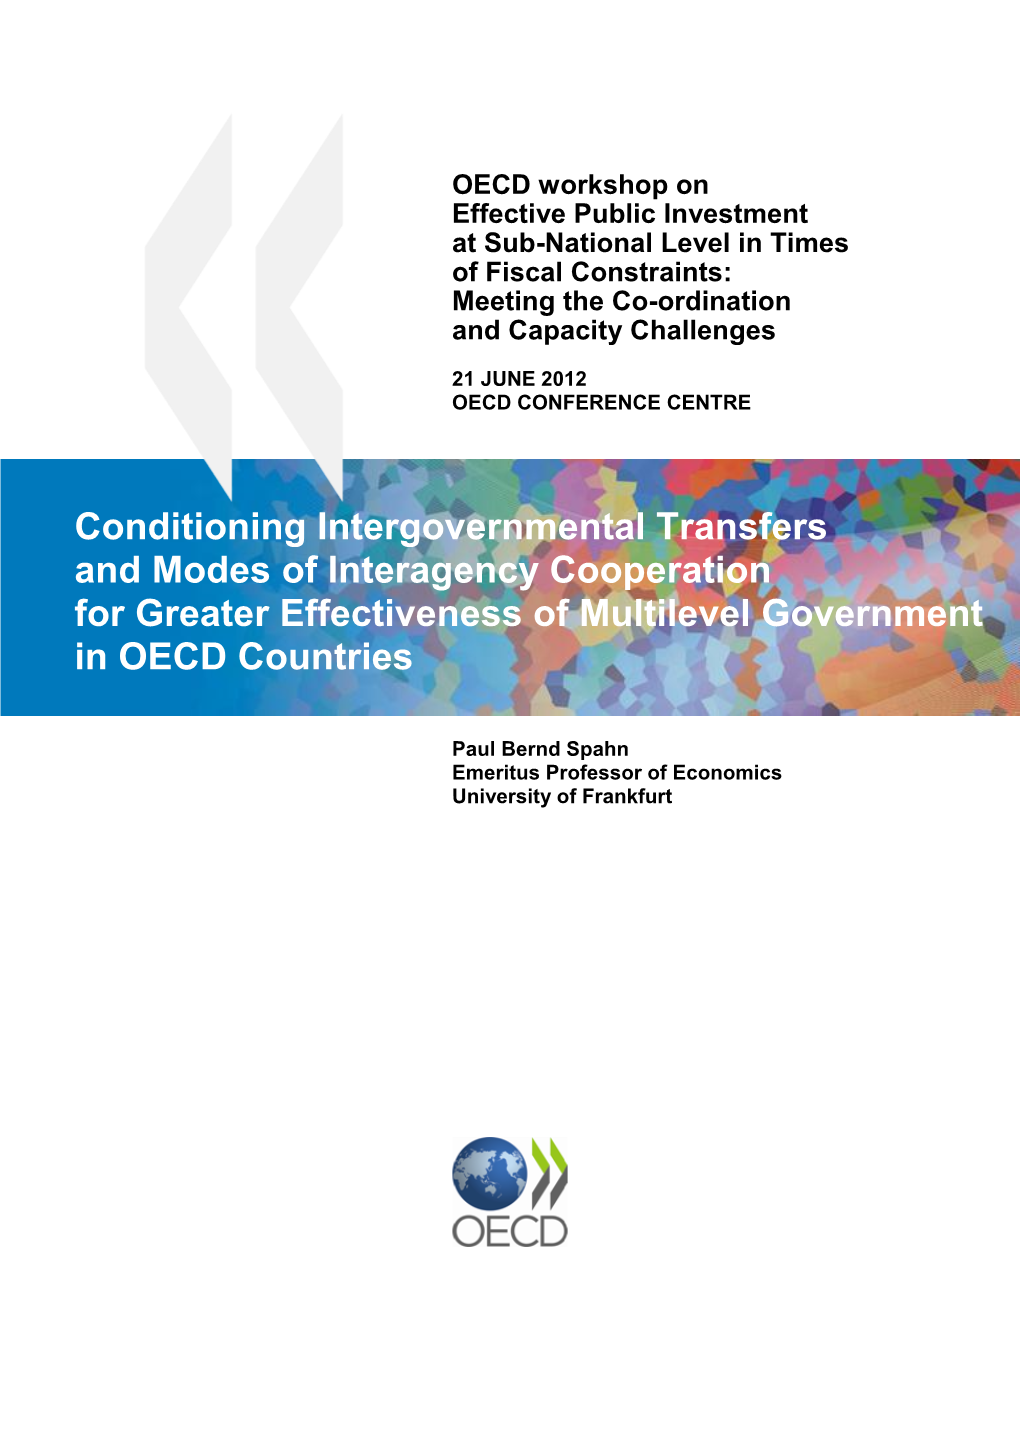 Conditioning Intergovernmental Transfers and Modes of Interagency Cooperation for Greater Effectiveness of Multilevel Government in OECD Countries